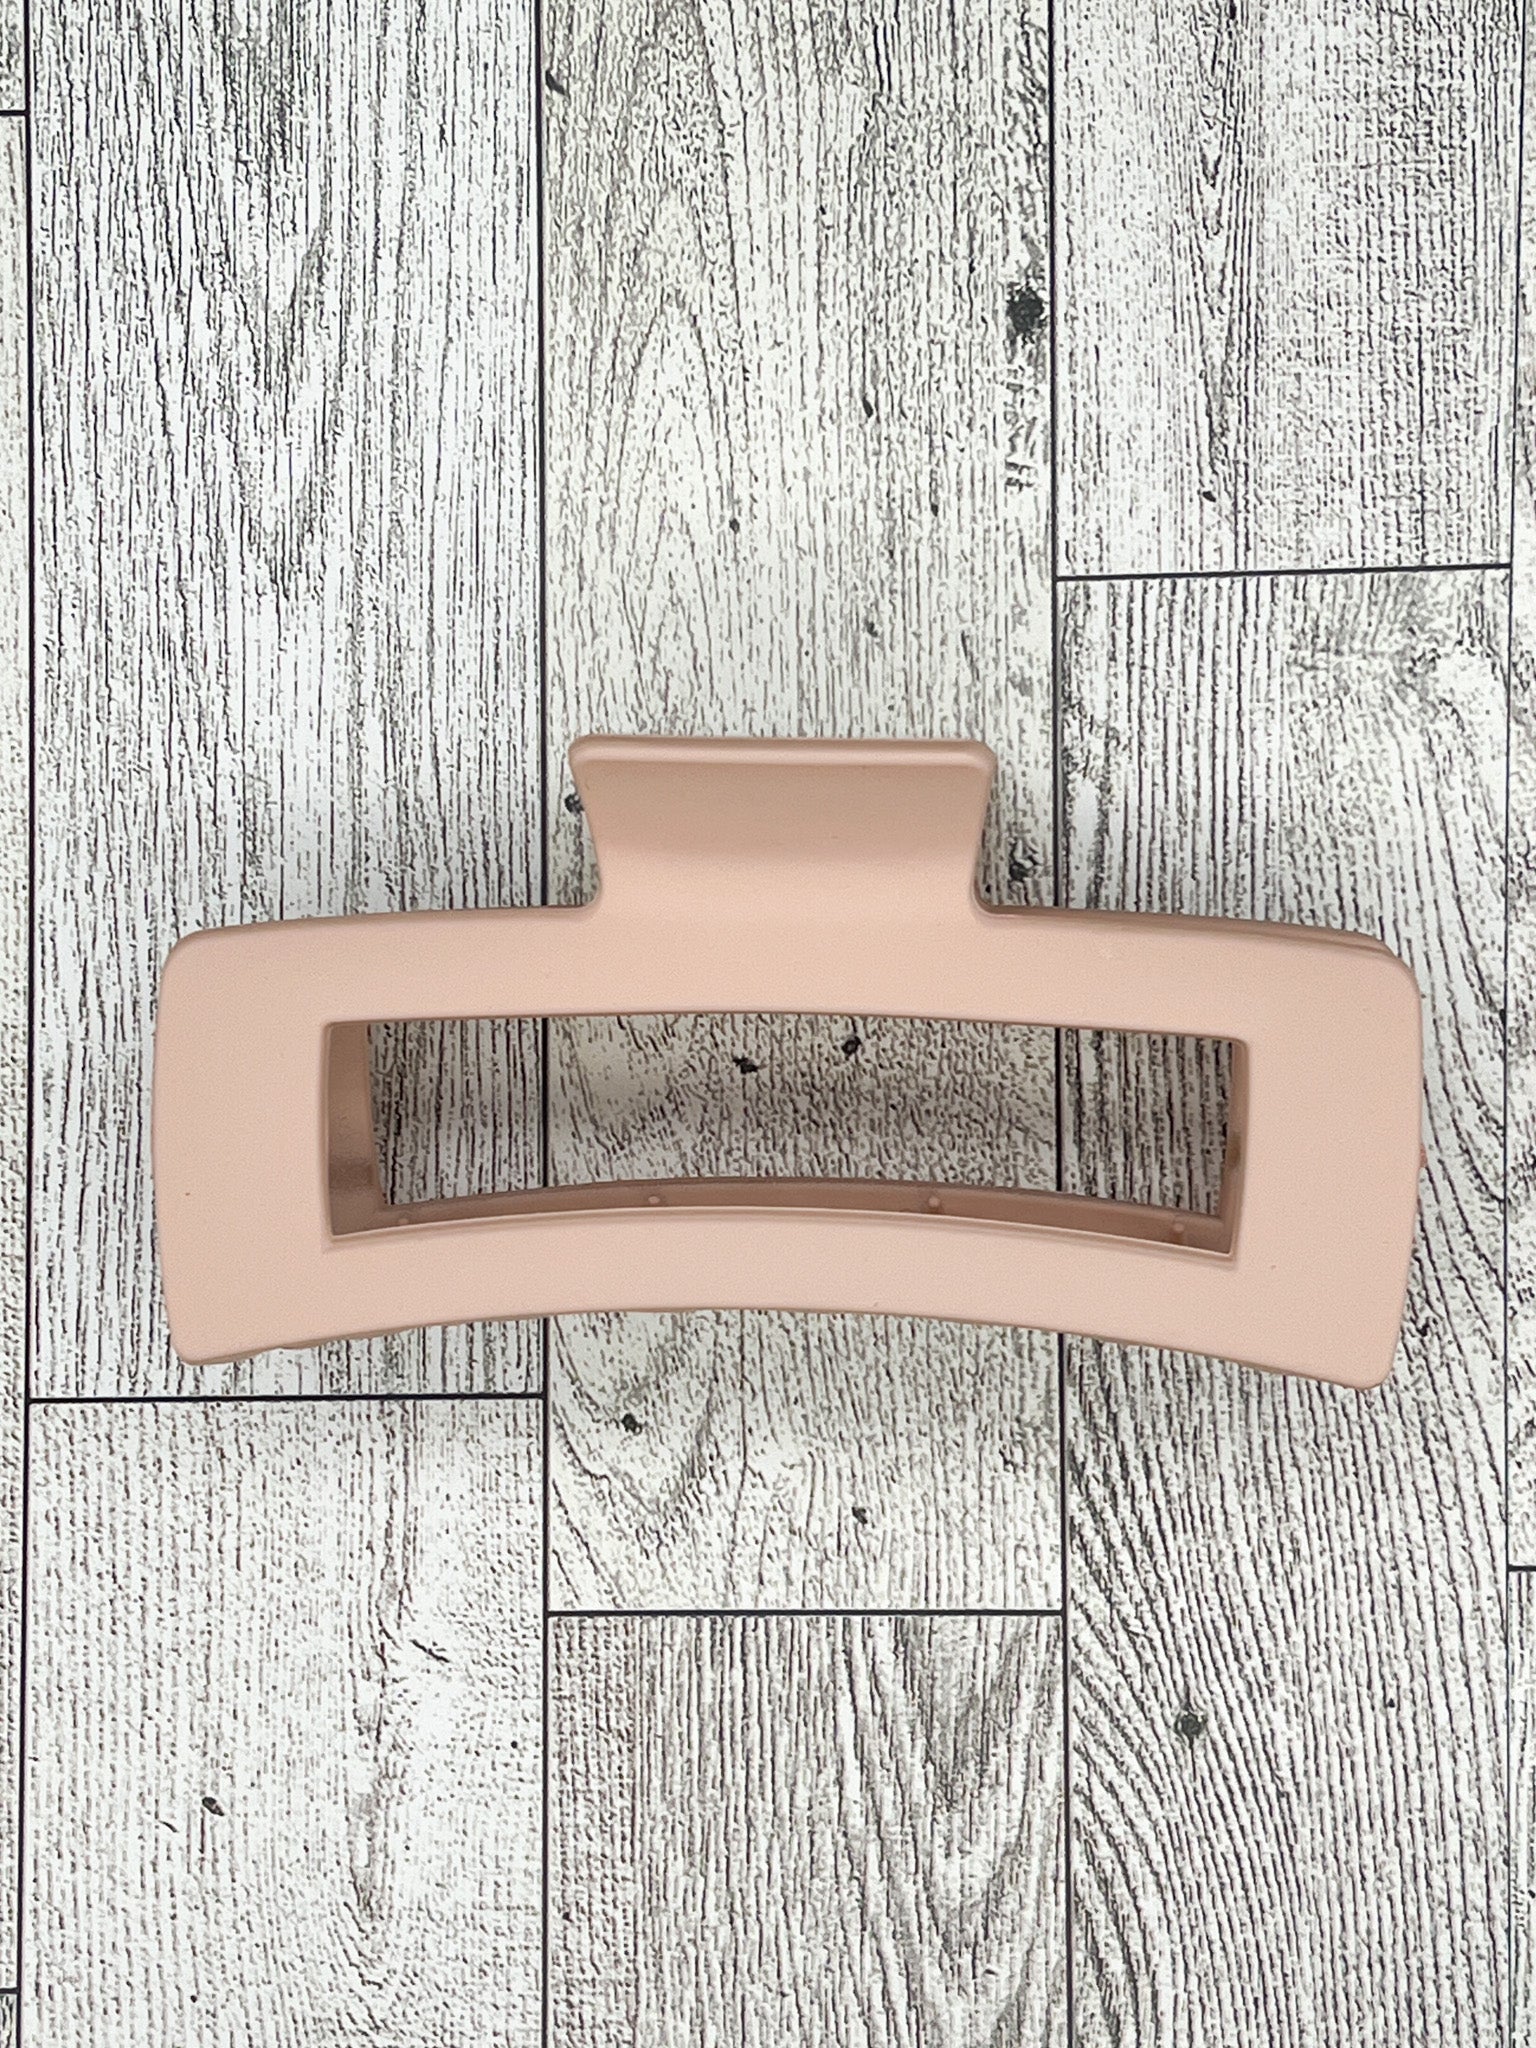 Matte Beige Pink Claw Clip - Classic Shape - 5 inches in length. Great for Braids, twists, long hair, thick hair, and coarse hair.